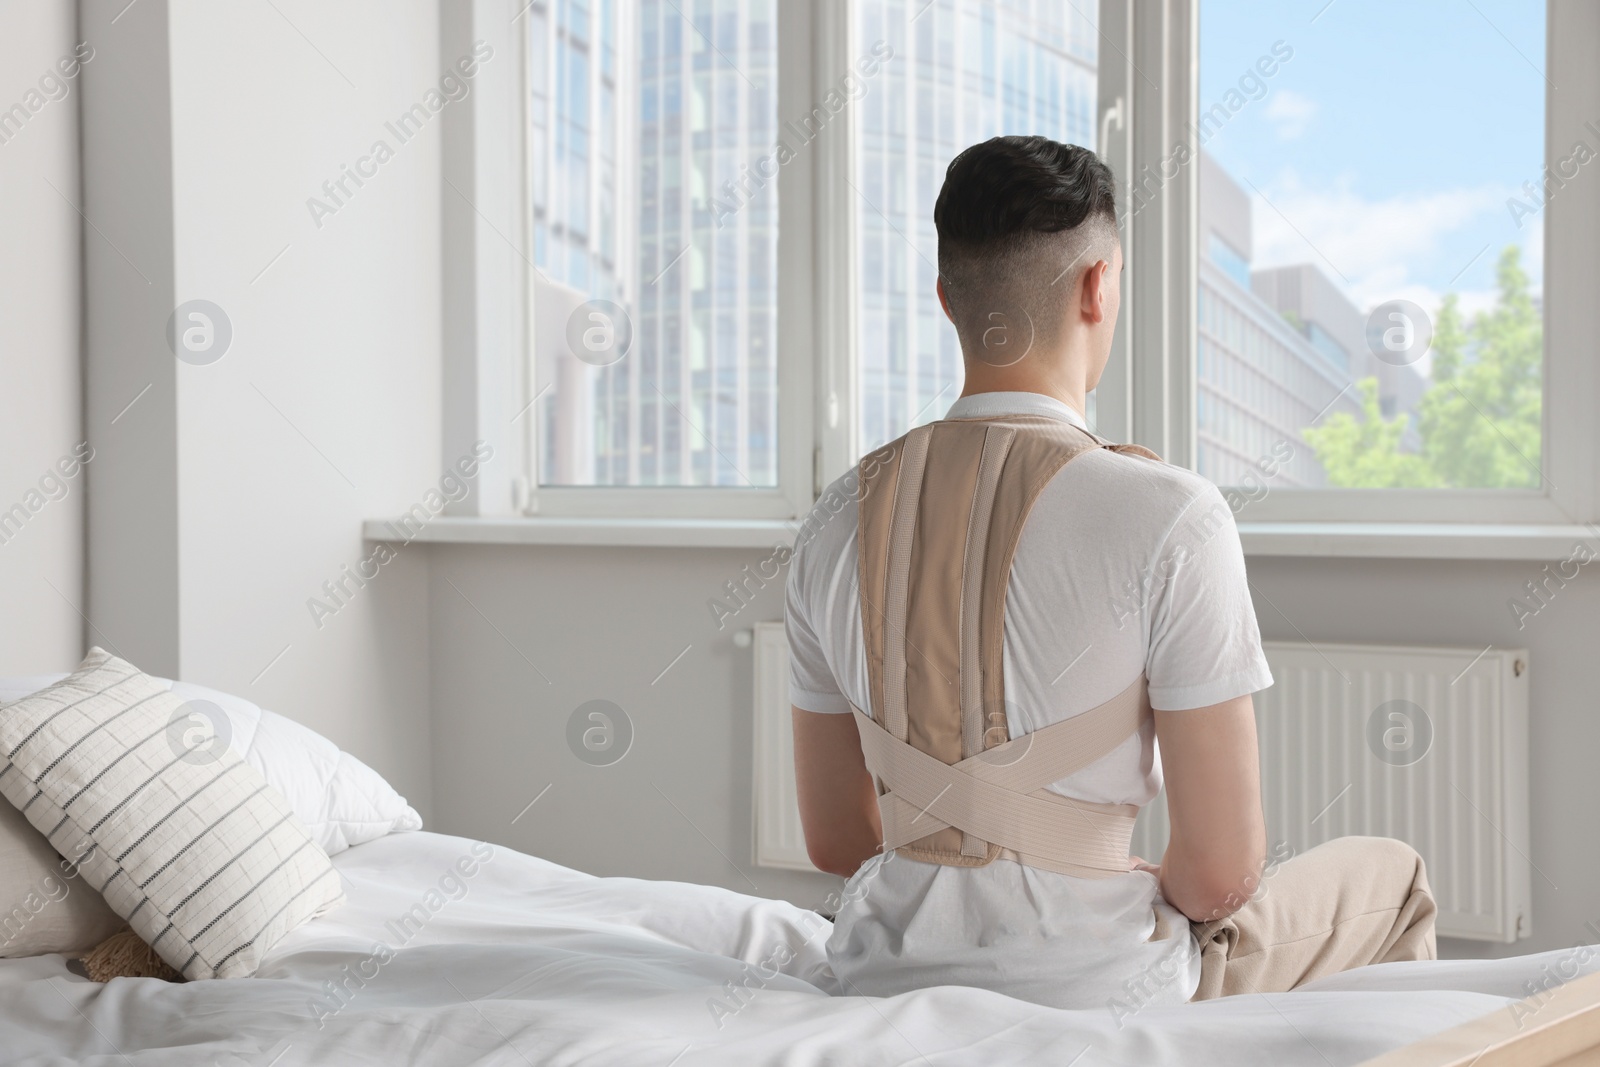 Photo of Man with orthopedic corset sitting in bedroom, back view